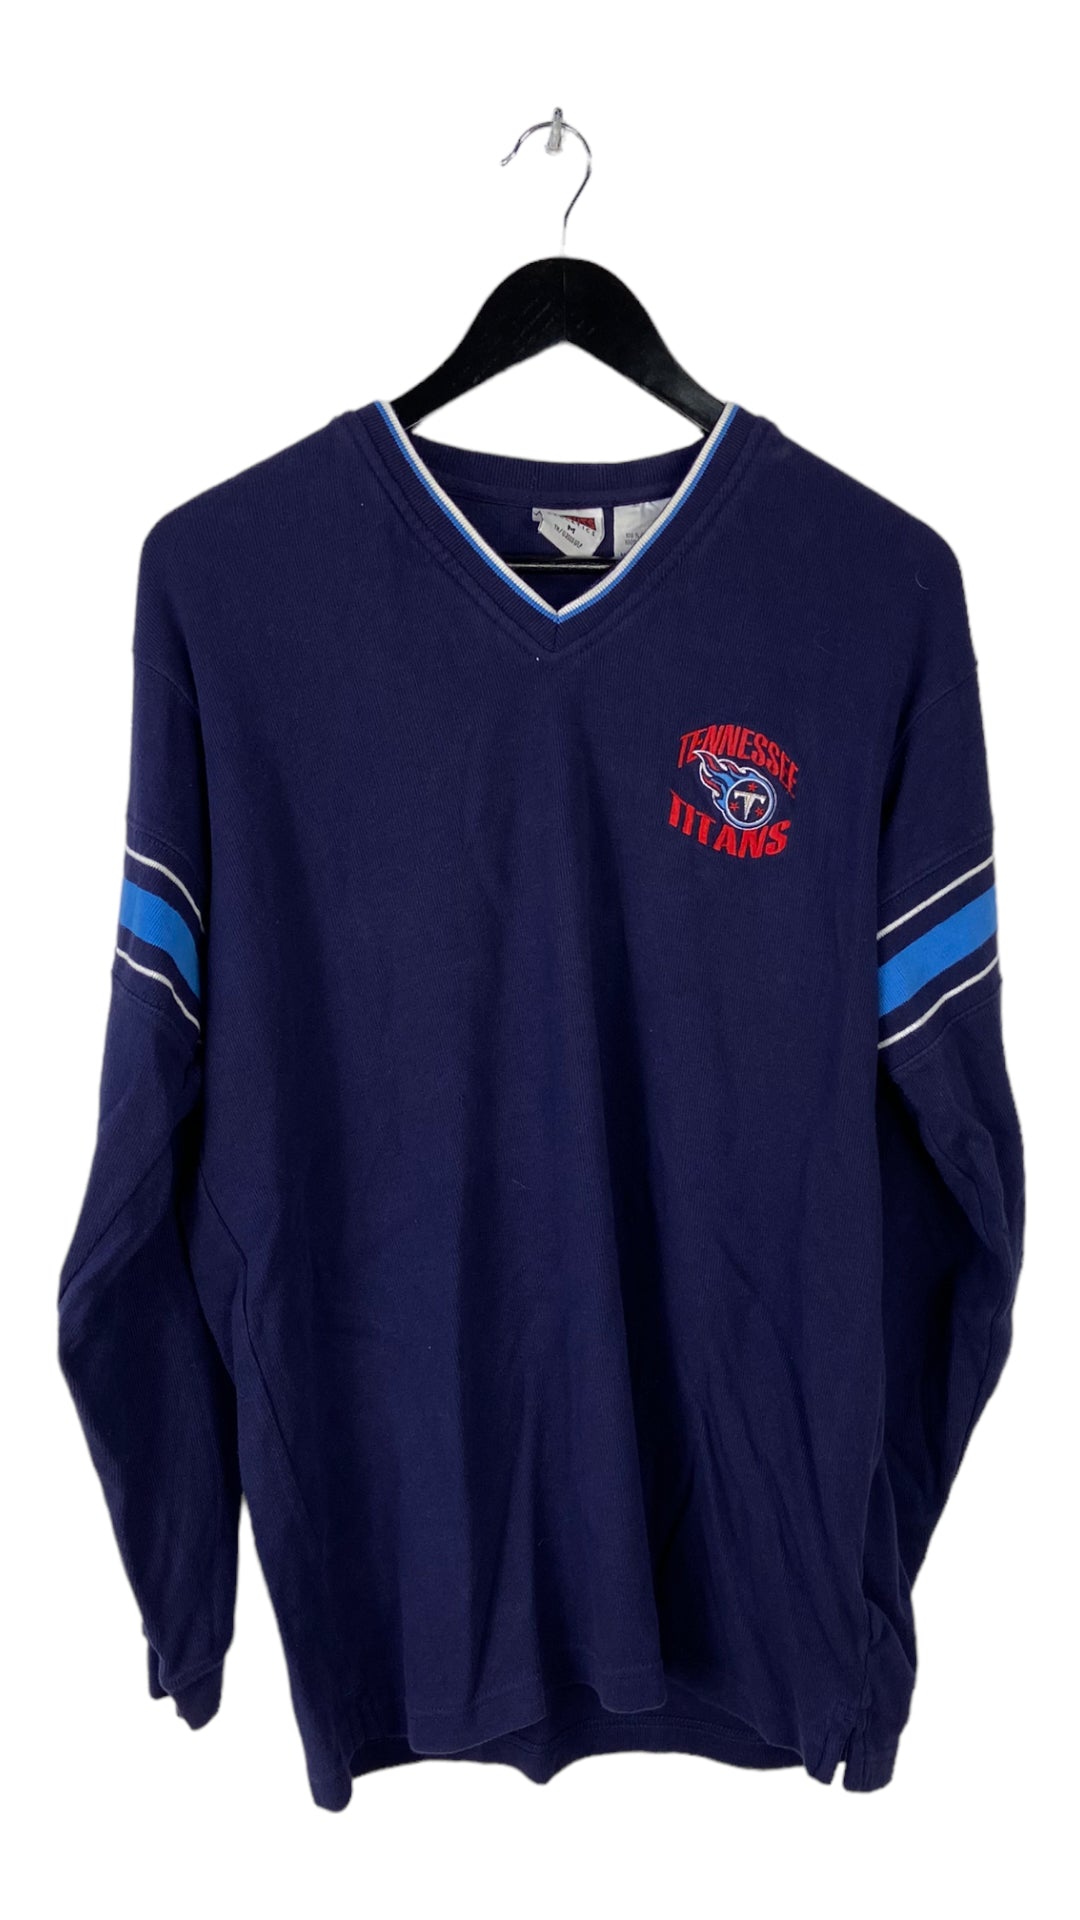 Load image into Gallery viewer, VTG Tennessee Titans Navy V-neck Sweater Sz M
